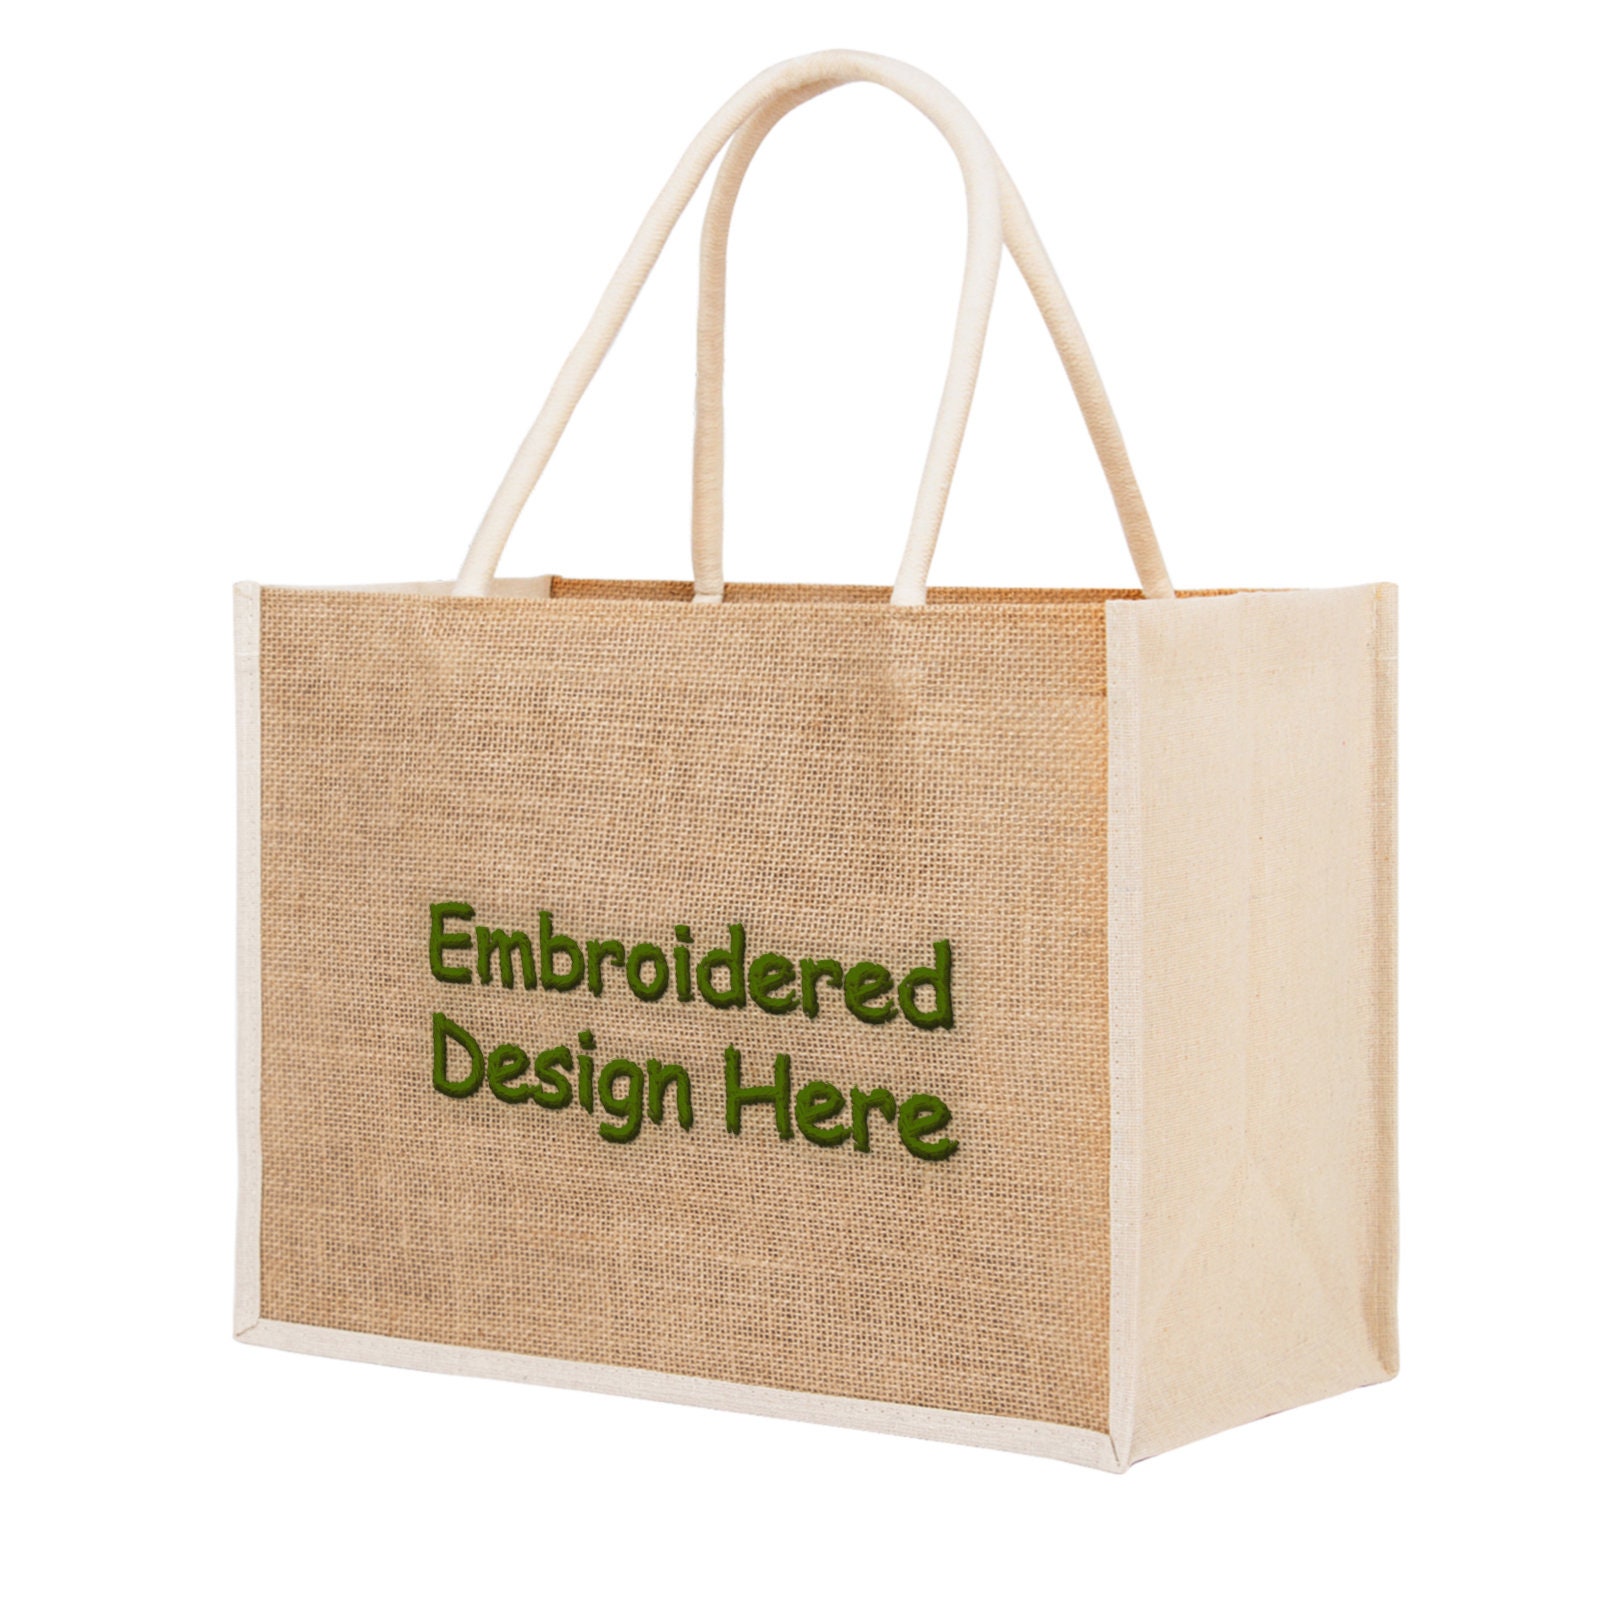 Personalized Tote Bag 25L Jumbo Size Gifts Canvas Bags Custom Printed  Reusable